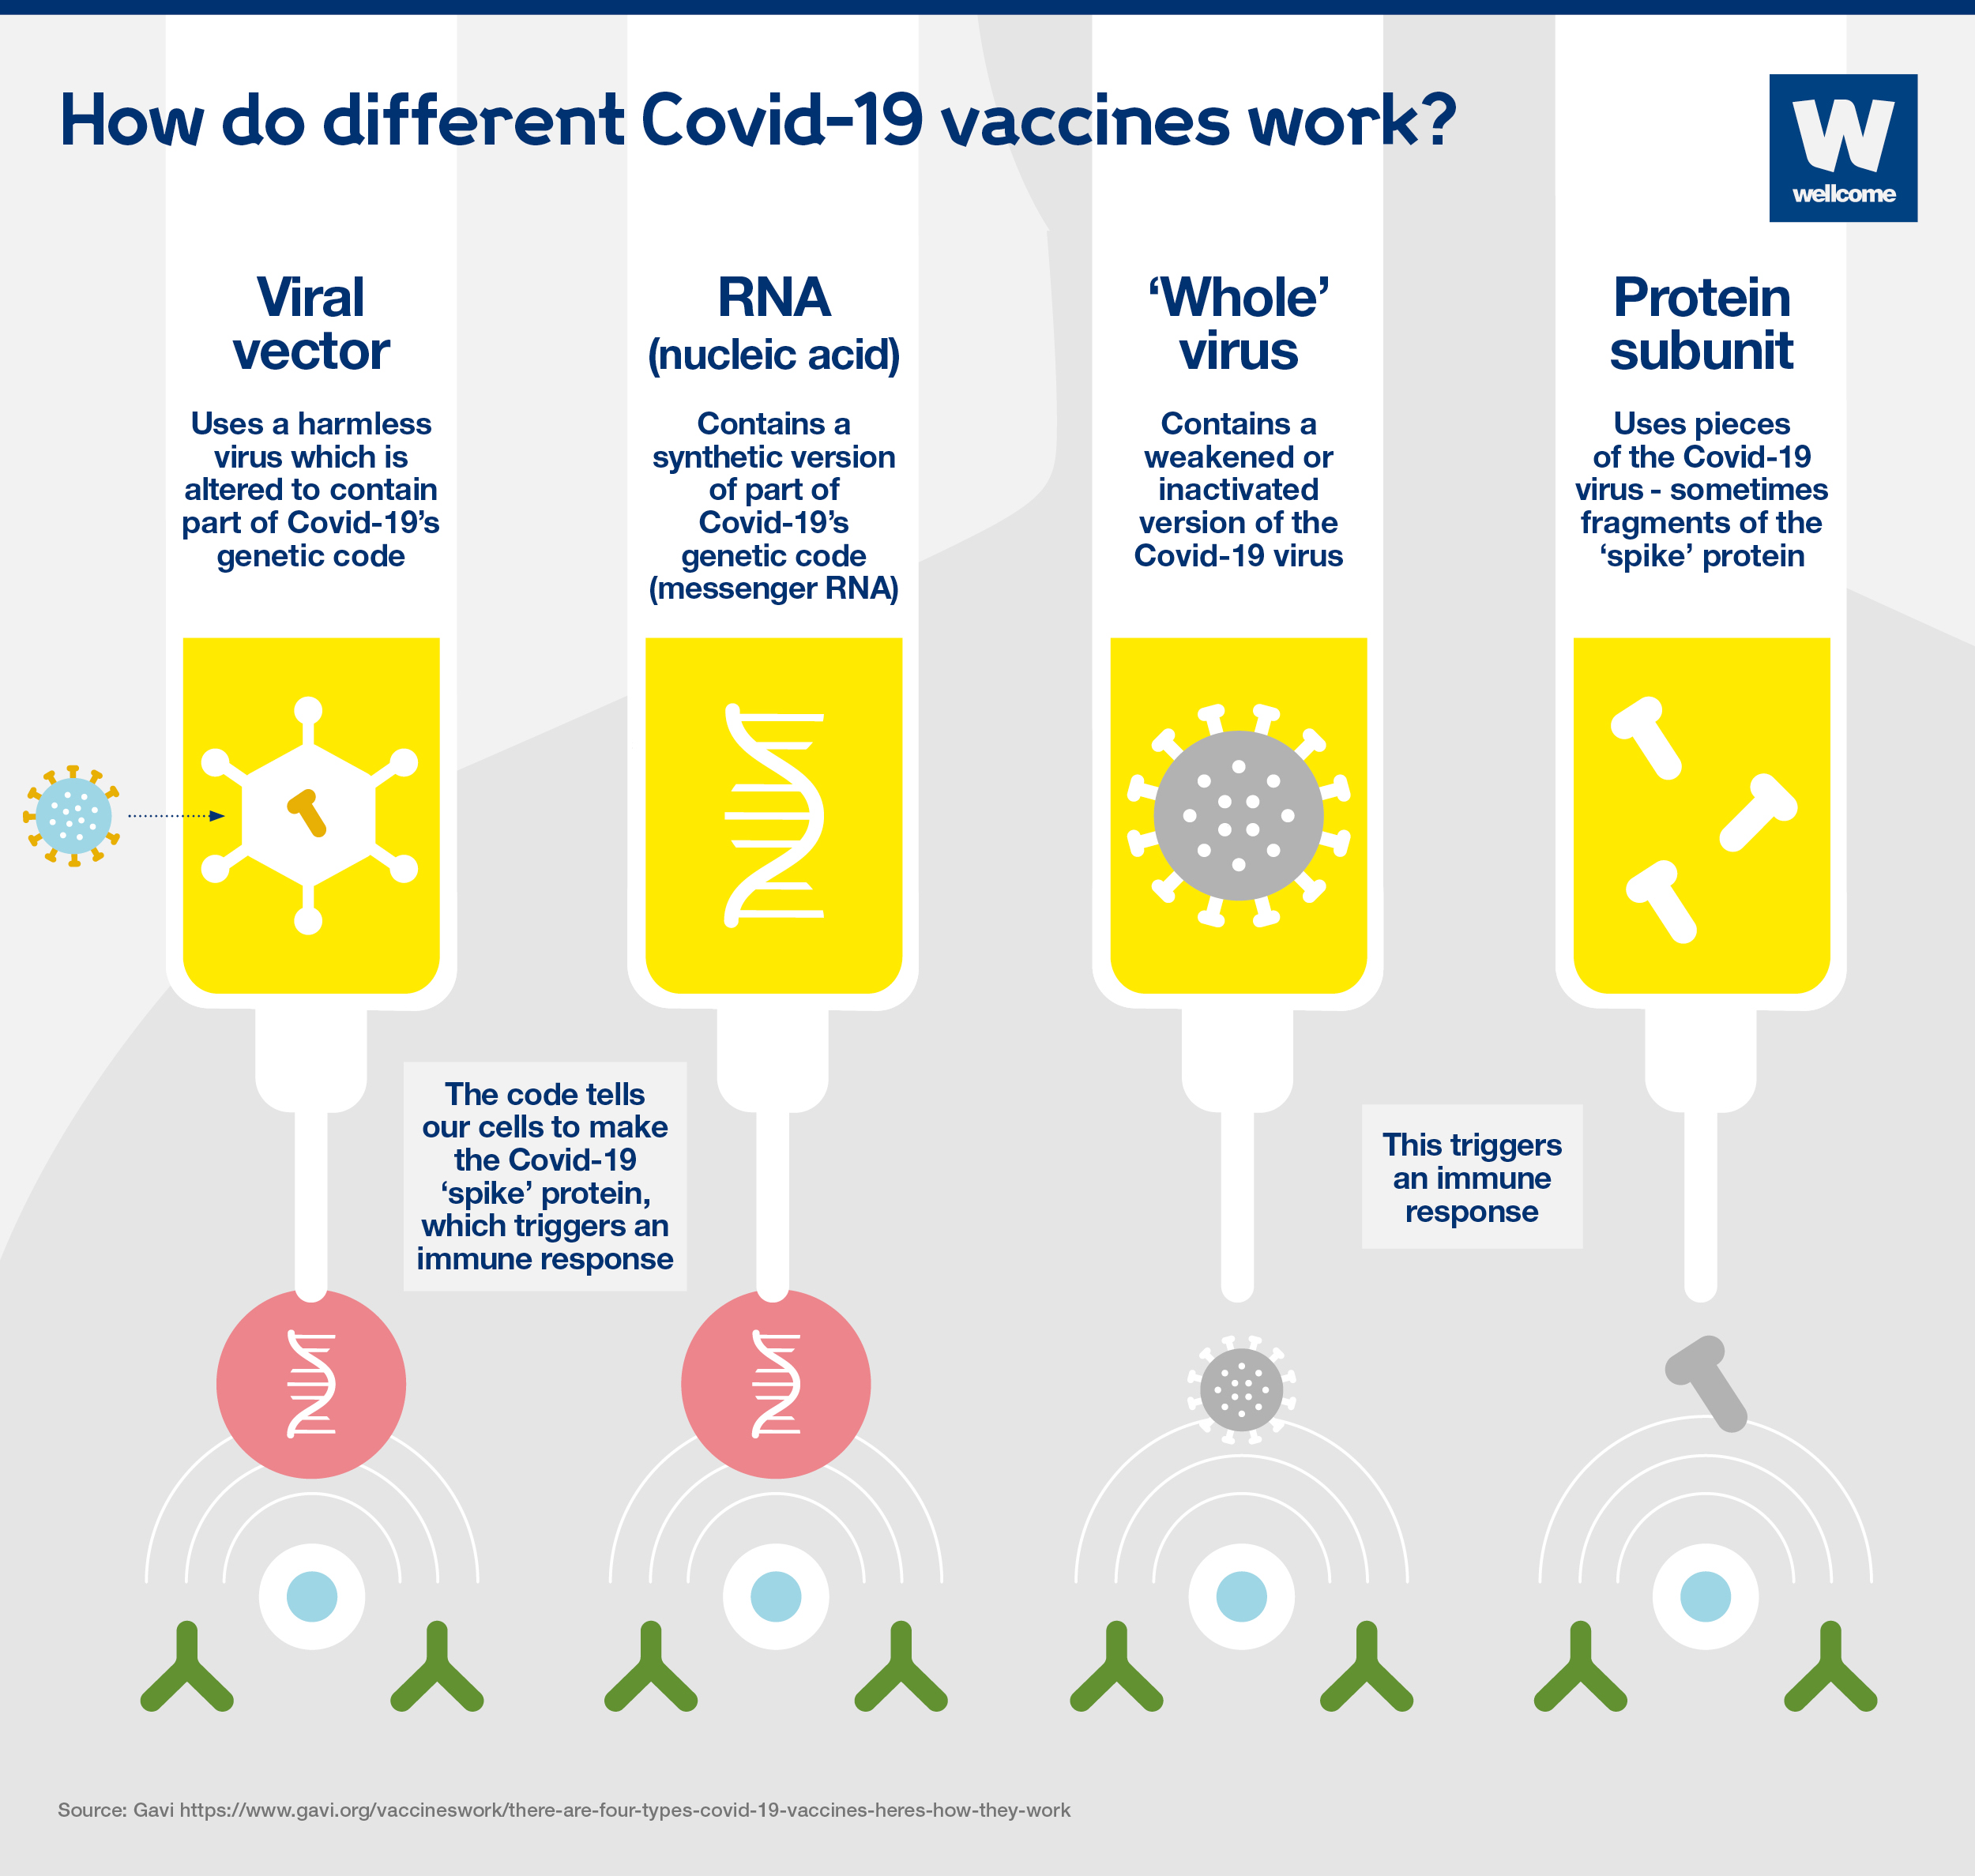 Illustration showing how different Covid-19 vaccines work including RNA, viral vector, whole virus and protein subunit